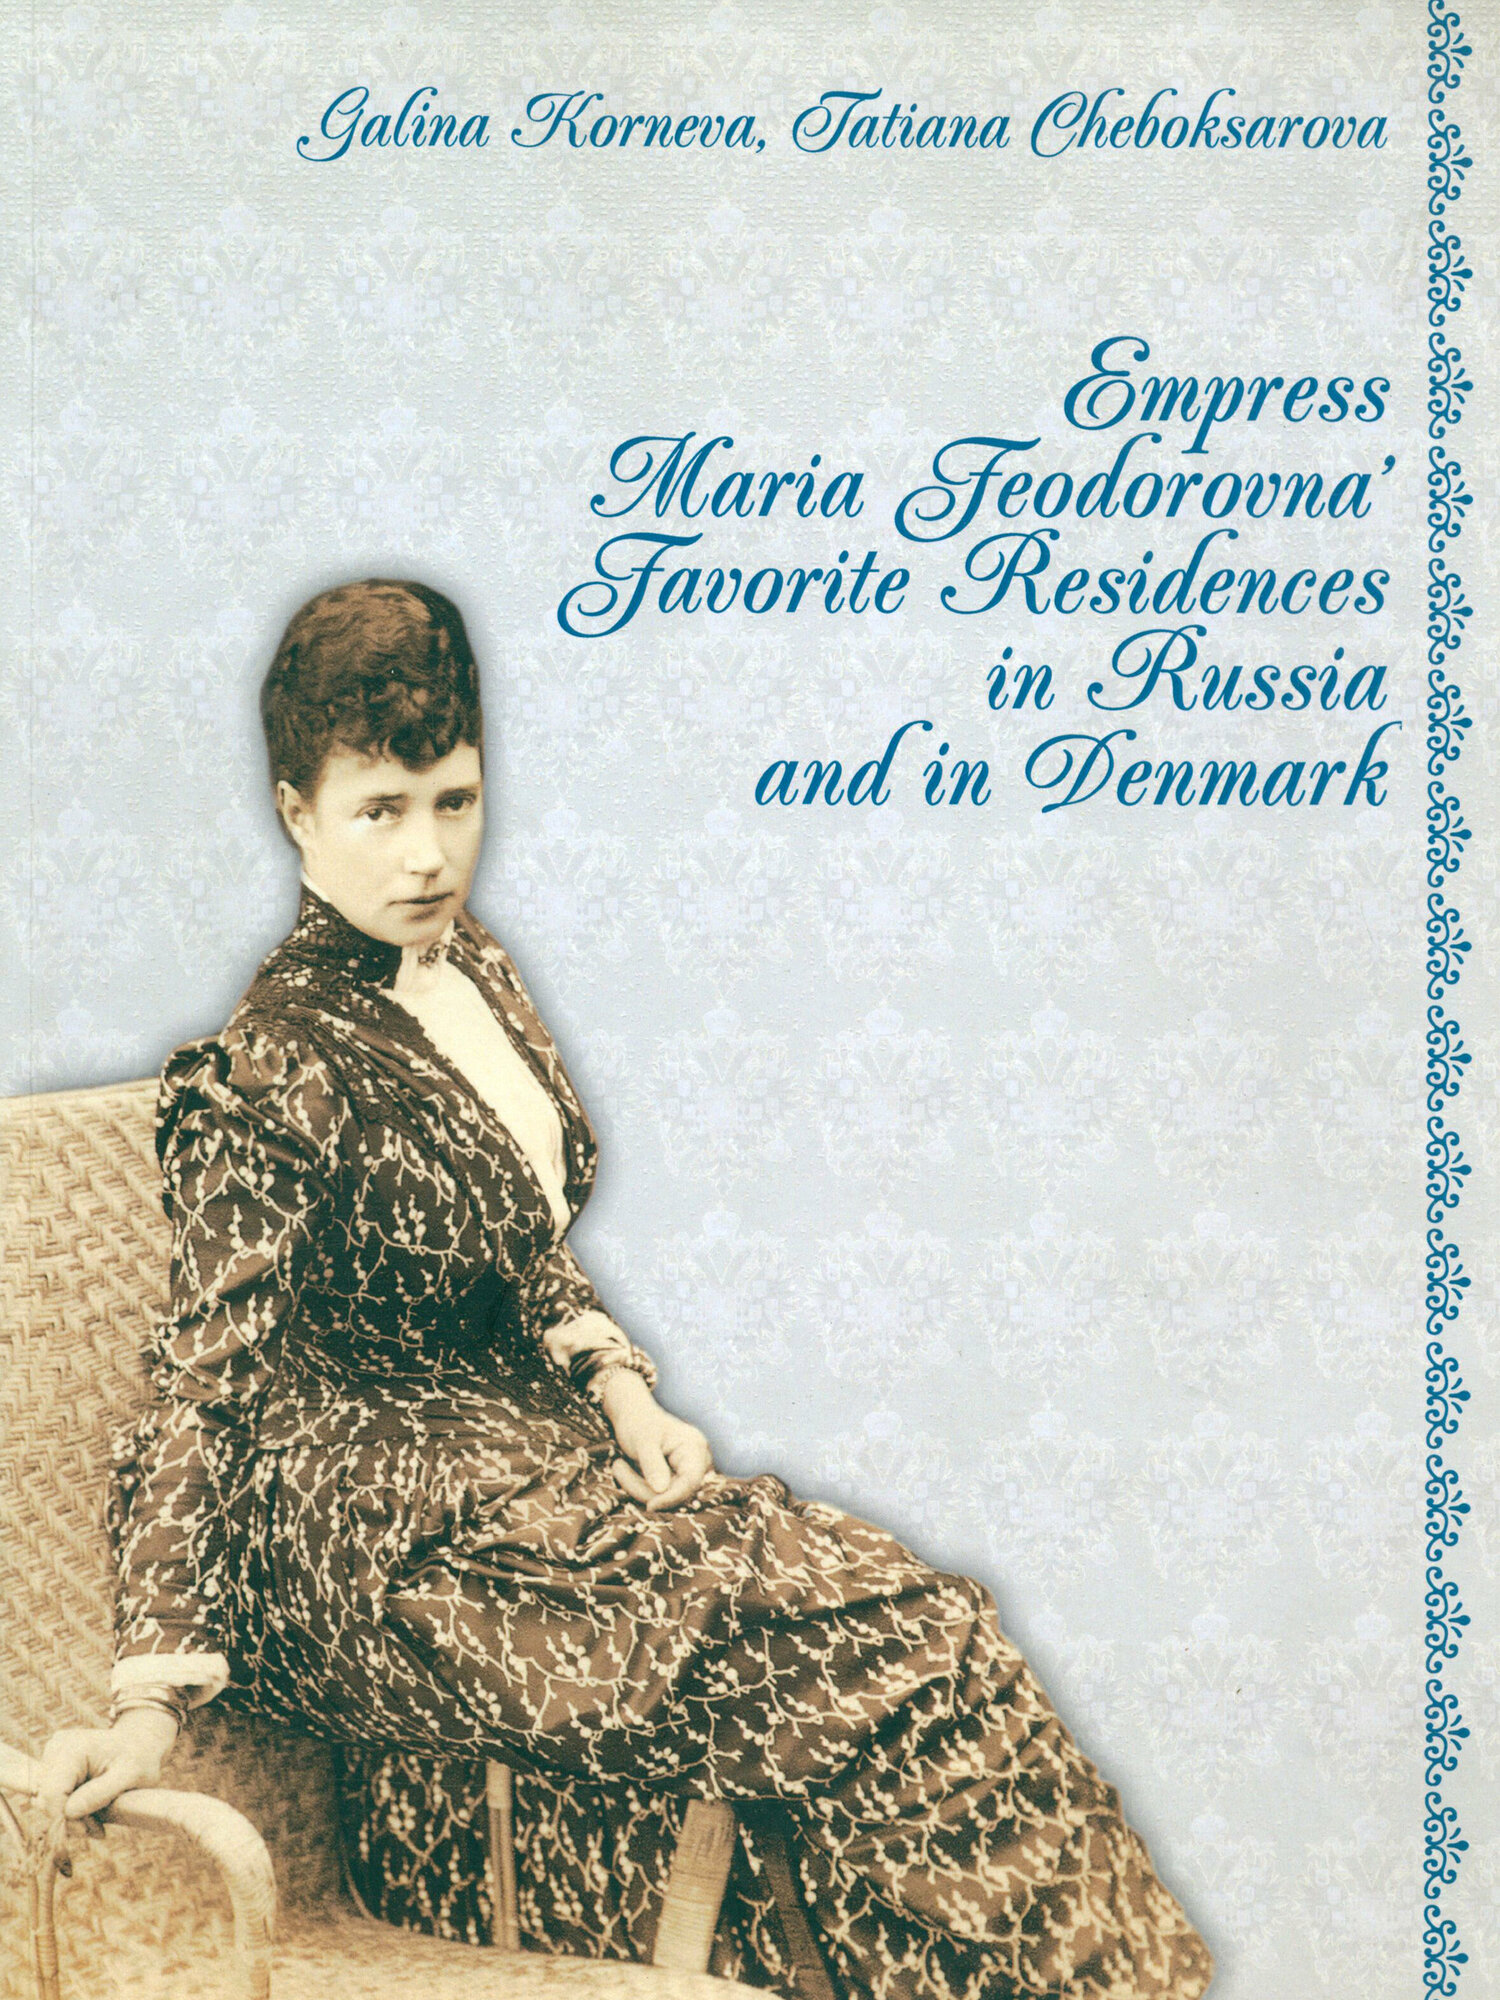 Empress Maria Feodorovna' Favorite Residences in Russia and in Denmark - фото №2